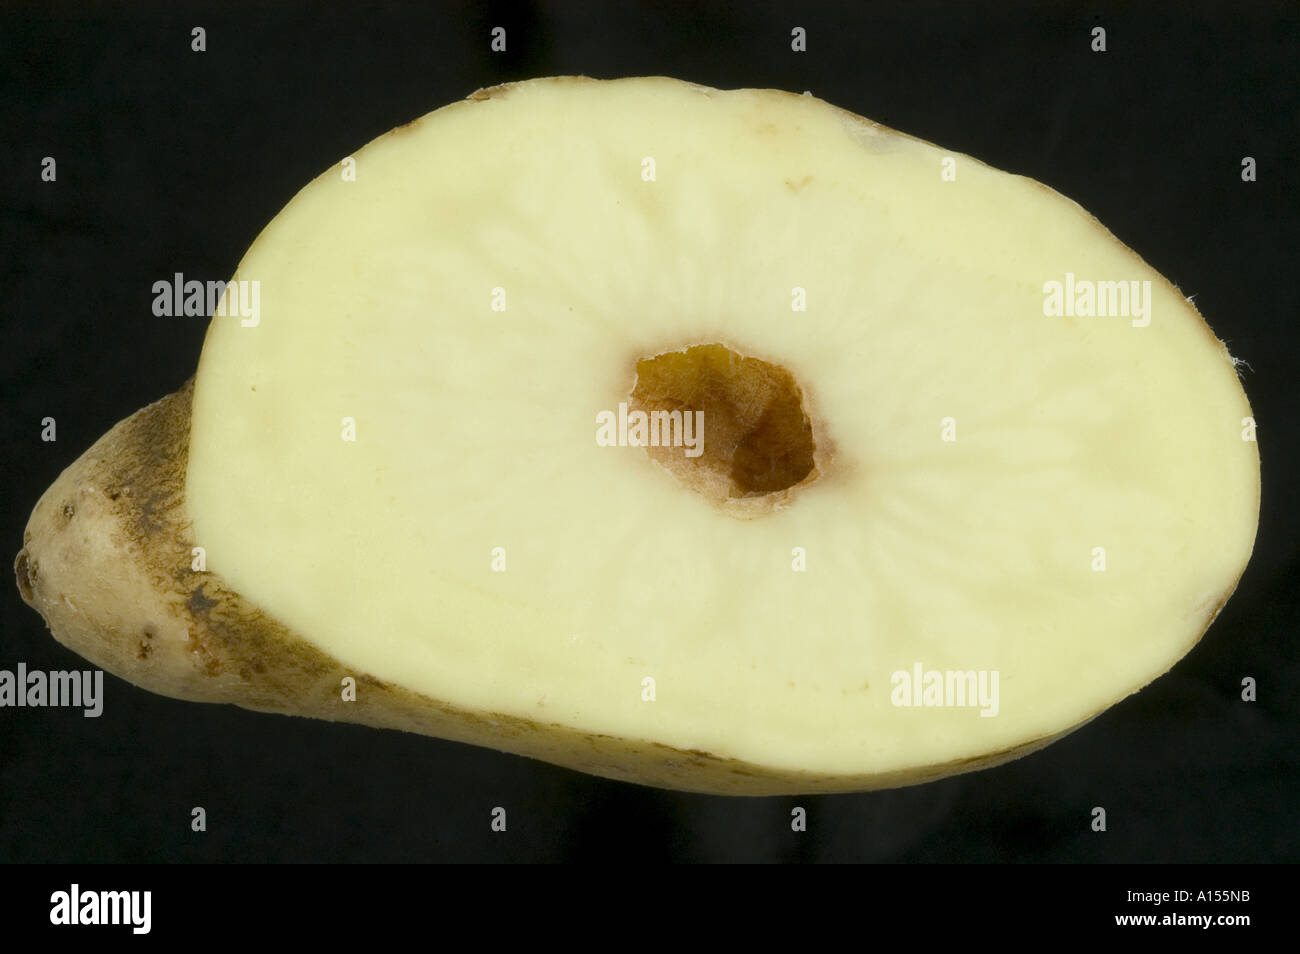 Hollow heart at the centre of a large overgrown potato tuber Stock Photo